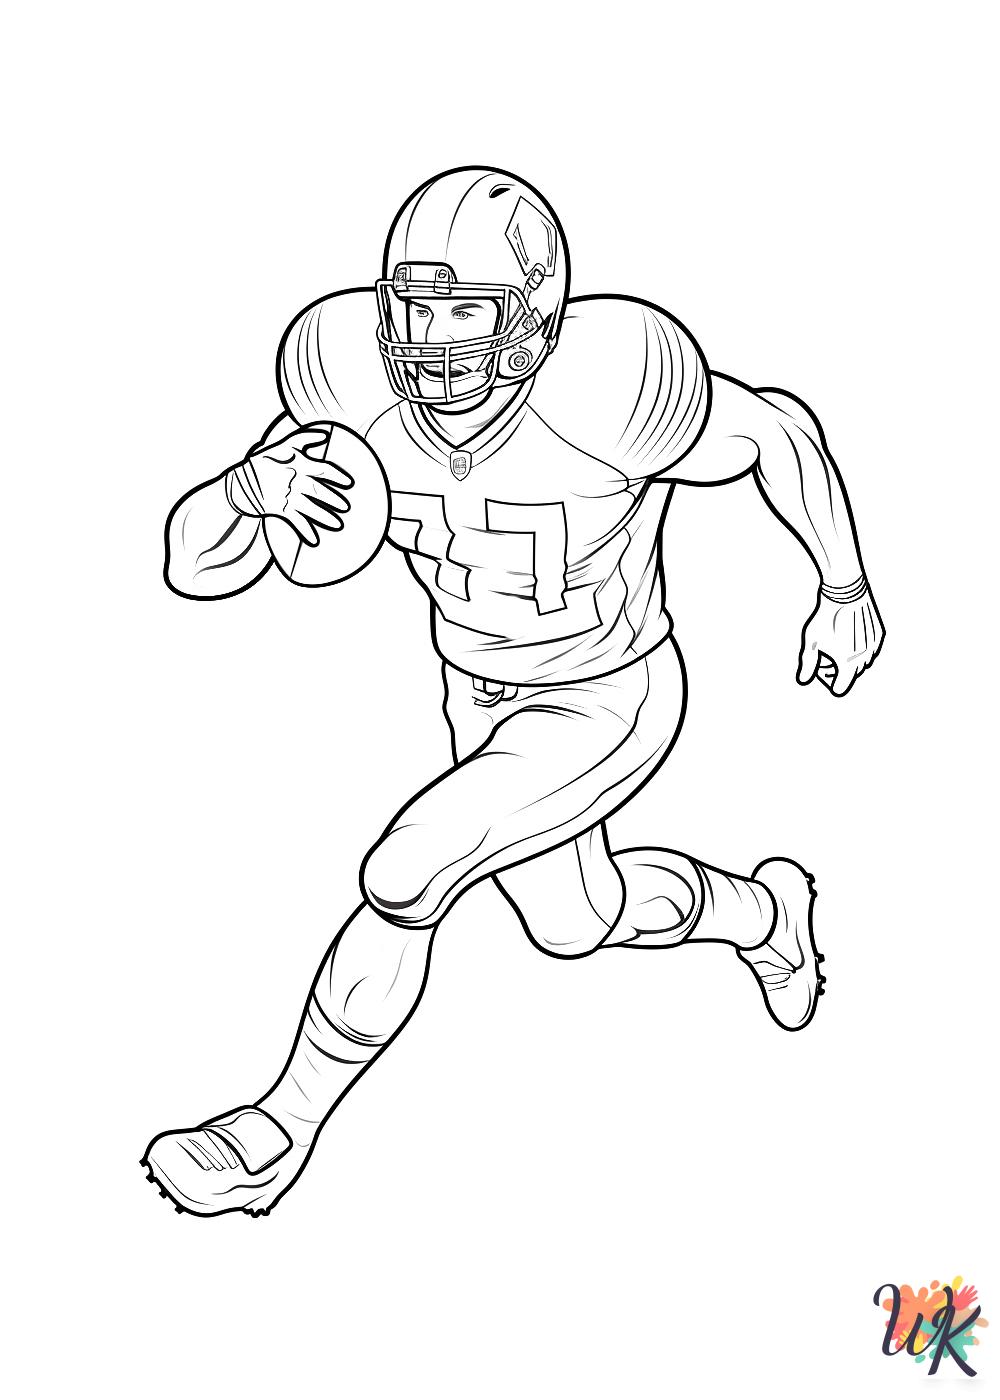 NFL Coloring Pages 7